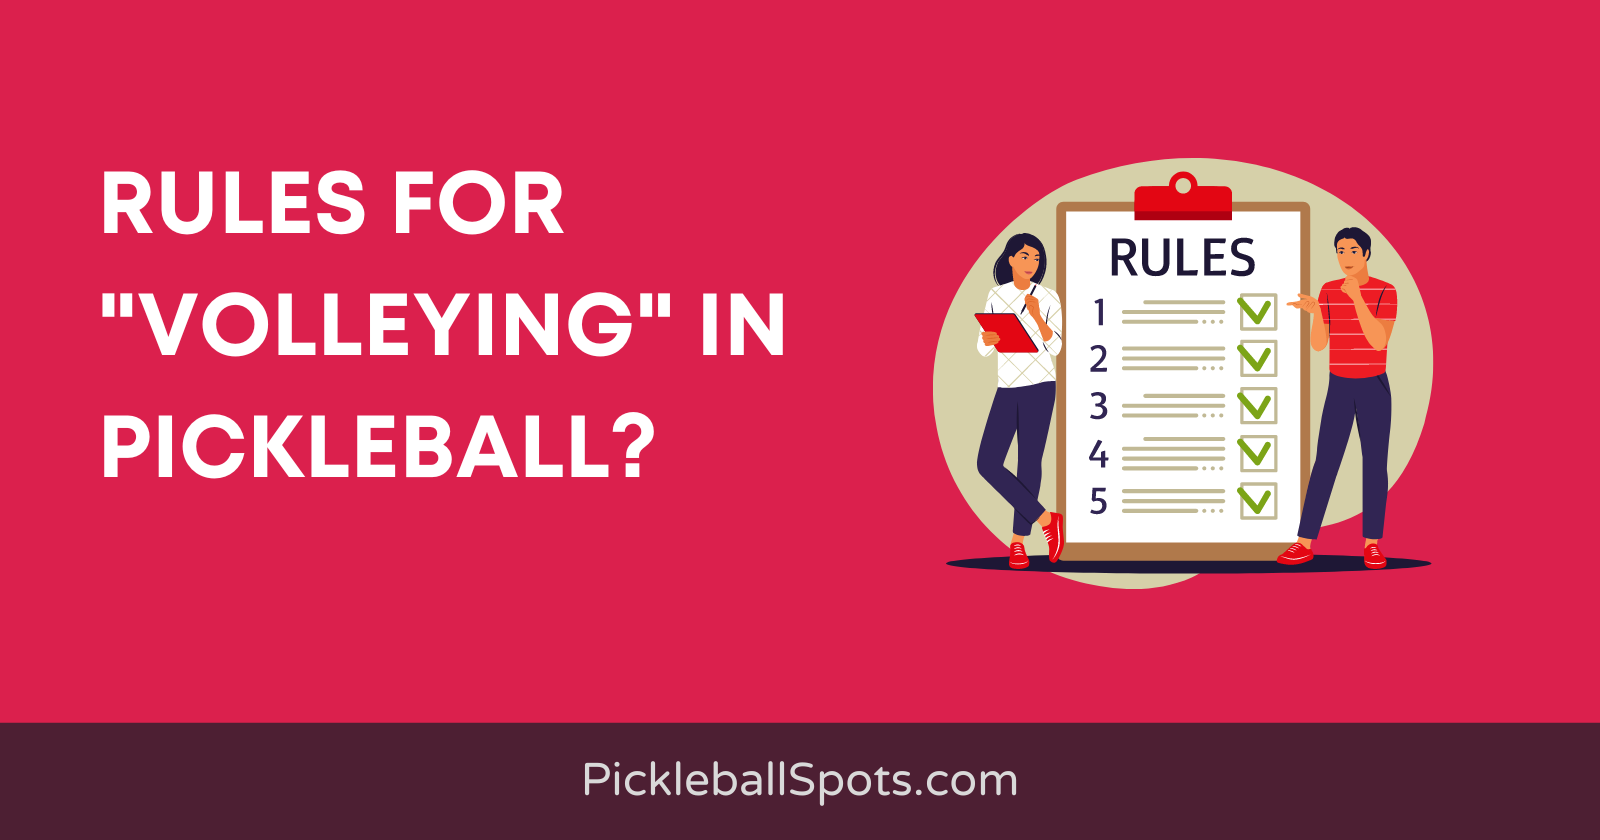 Volleying Rules In Pickleball